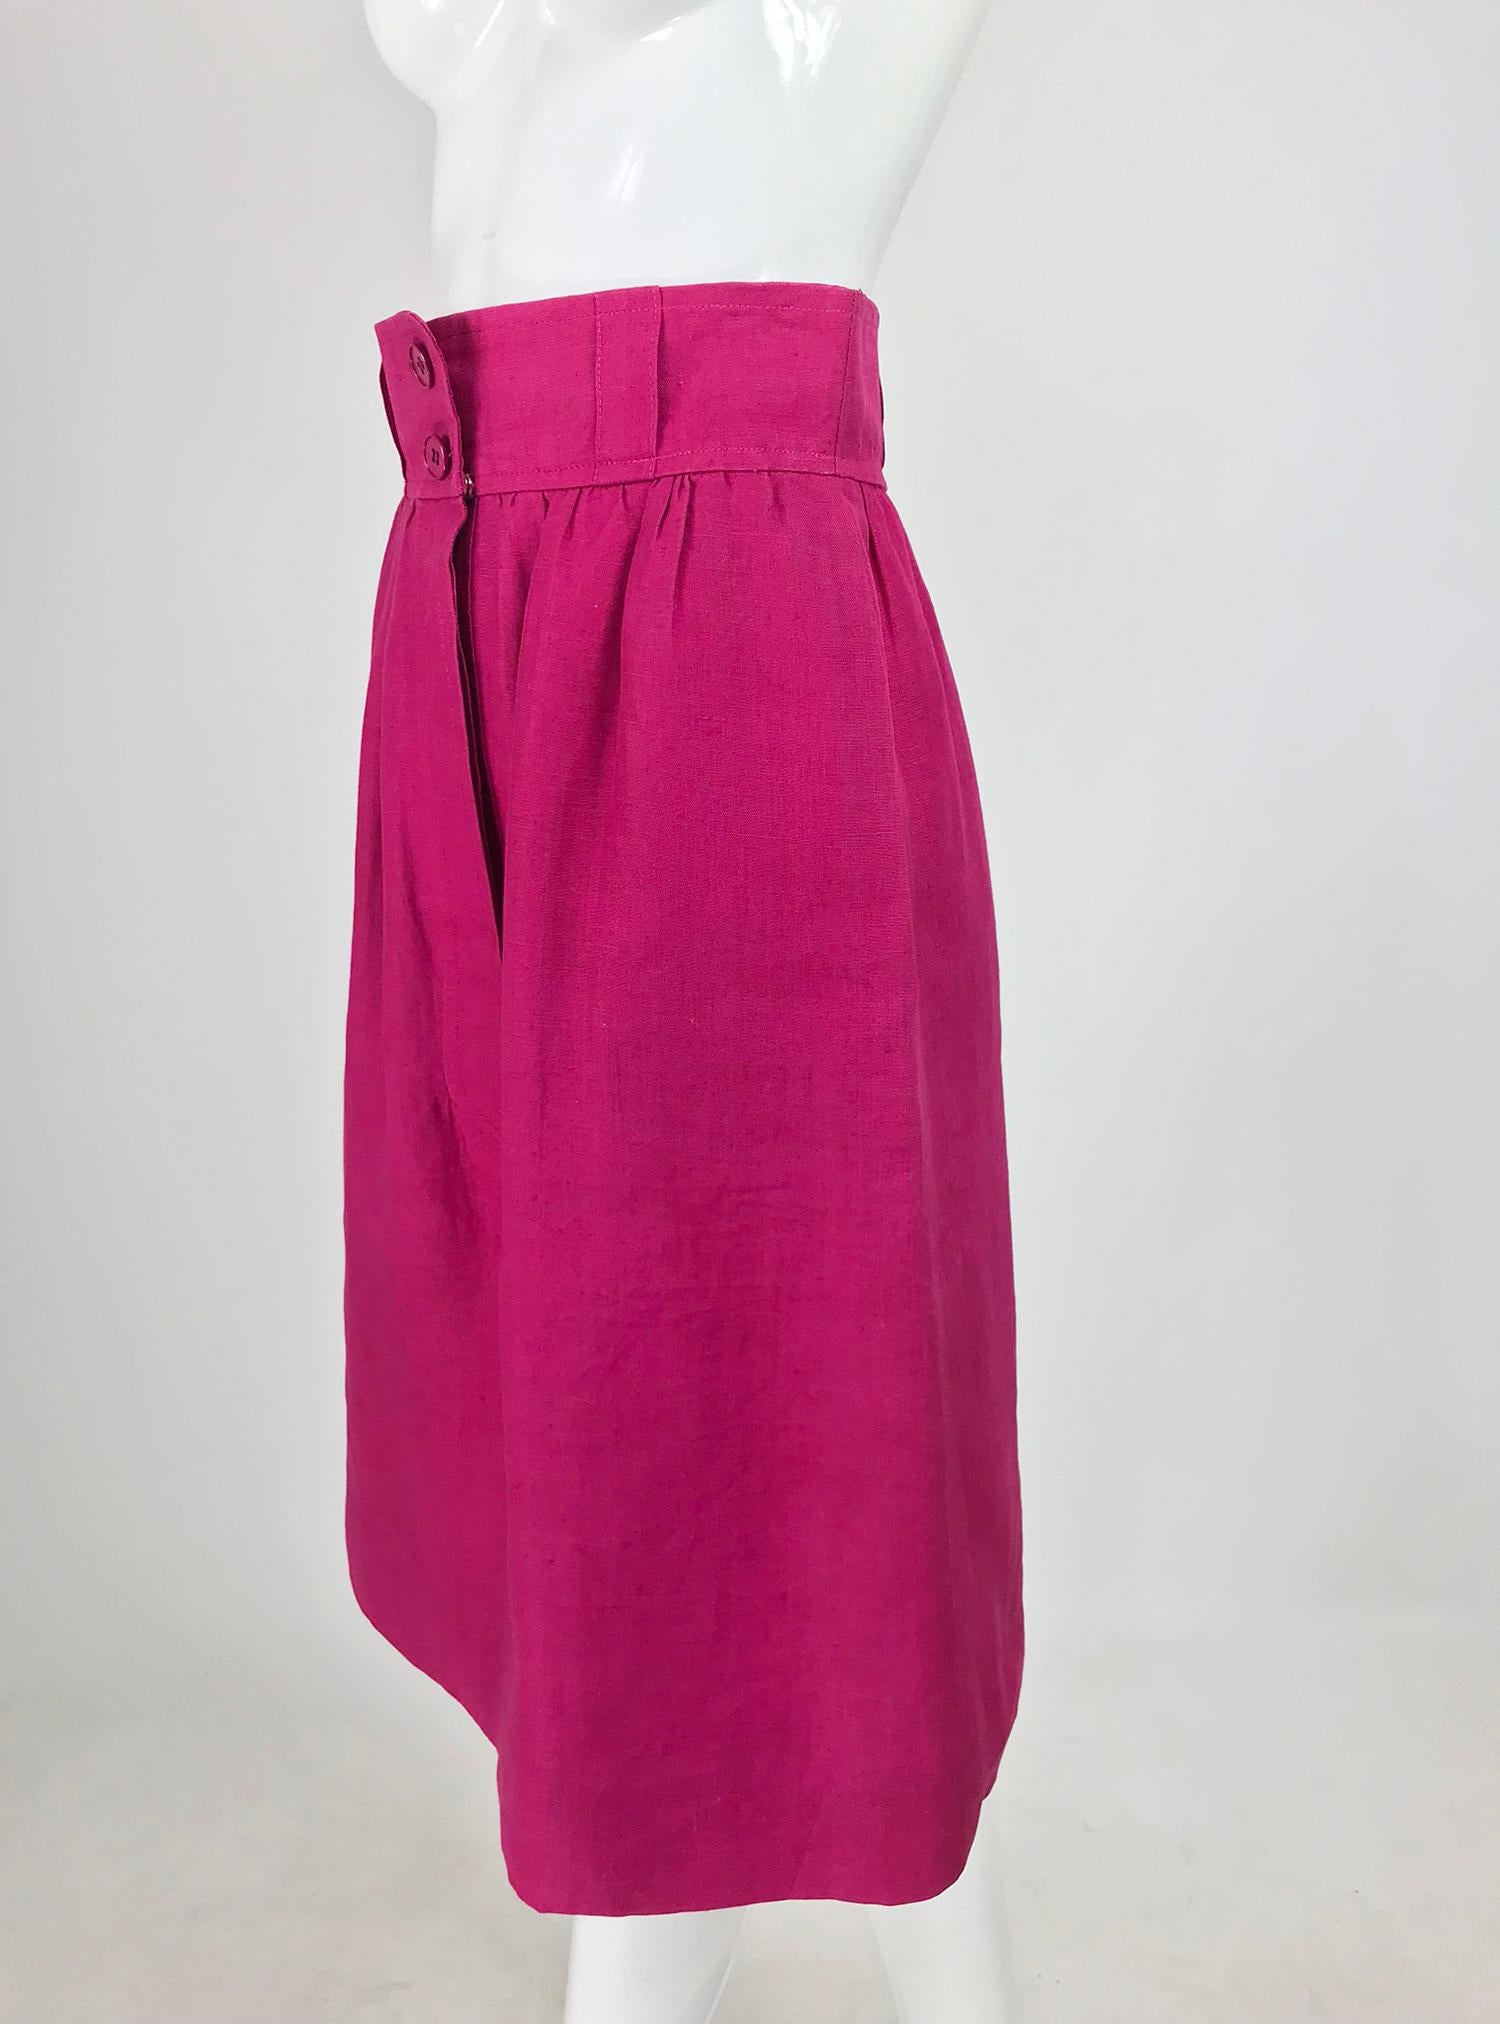 Givenchy Hot Pink Linen Skirt 1980s 6